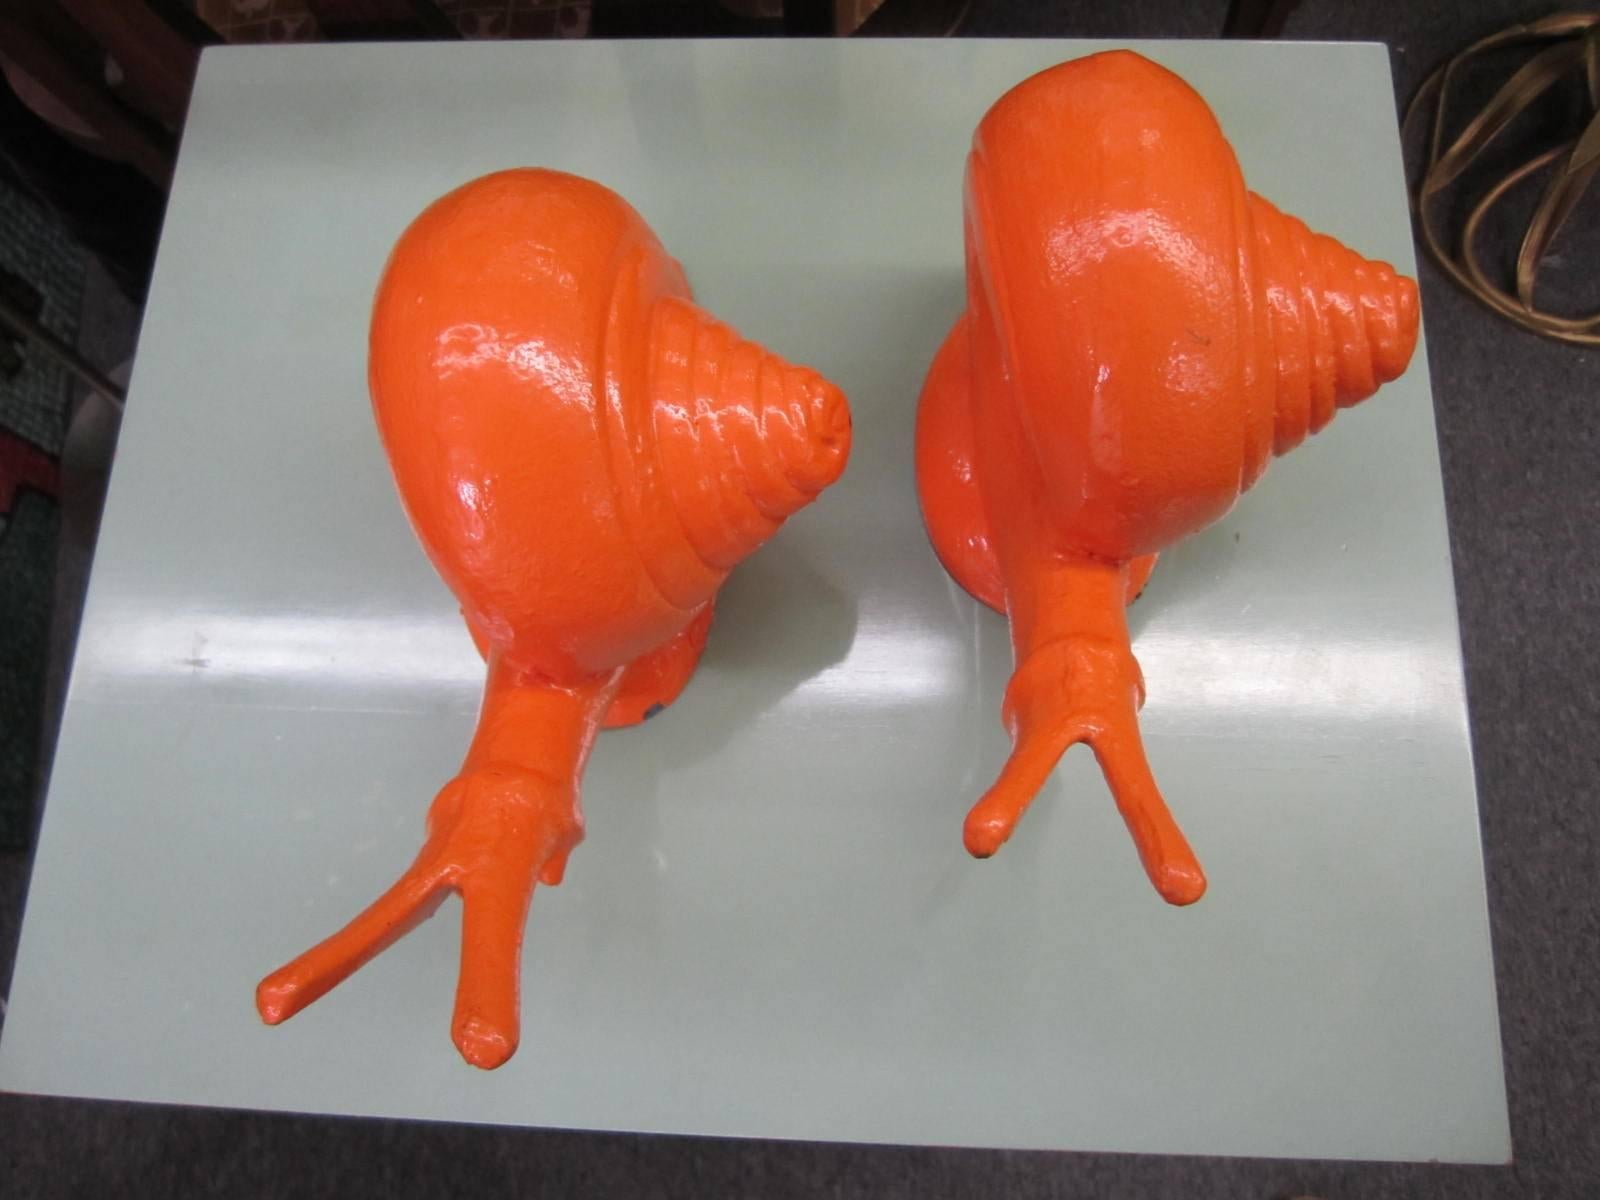 Whimsical pair of cast iron painted orange snail bookends. We love the large-scale and pop color of these fun holders of books.